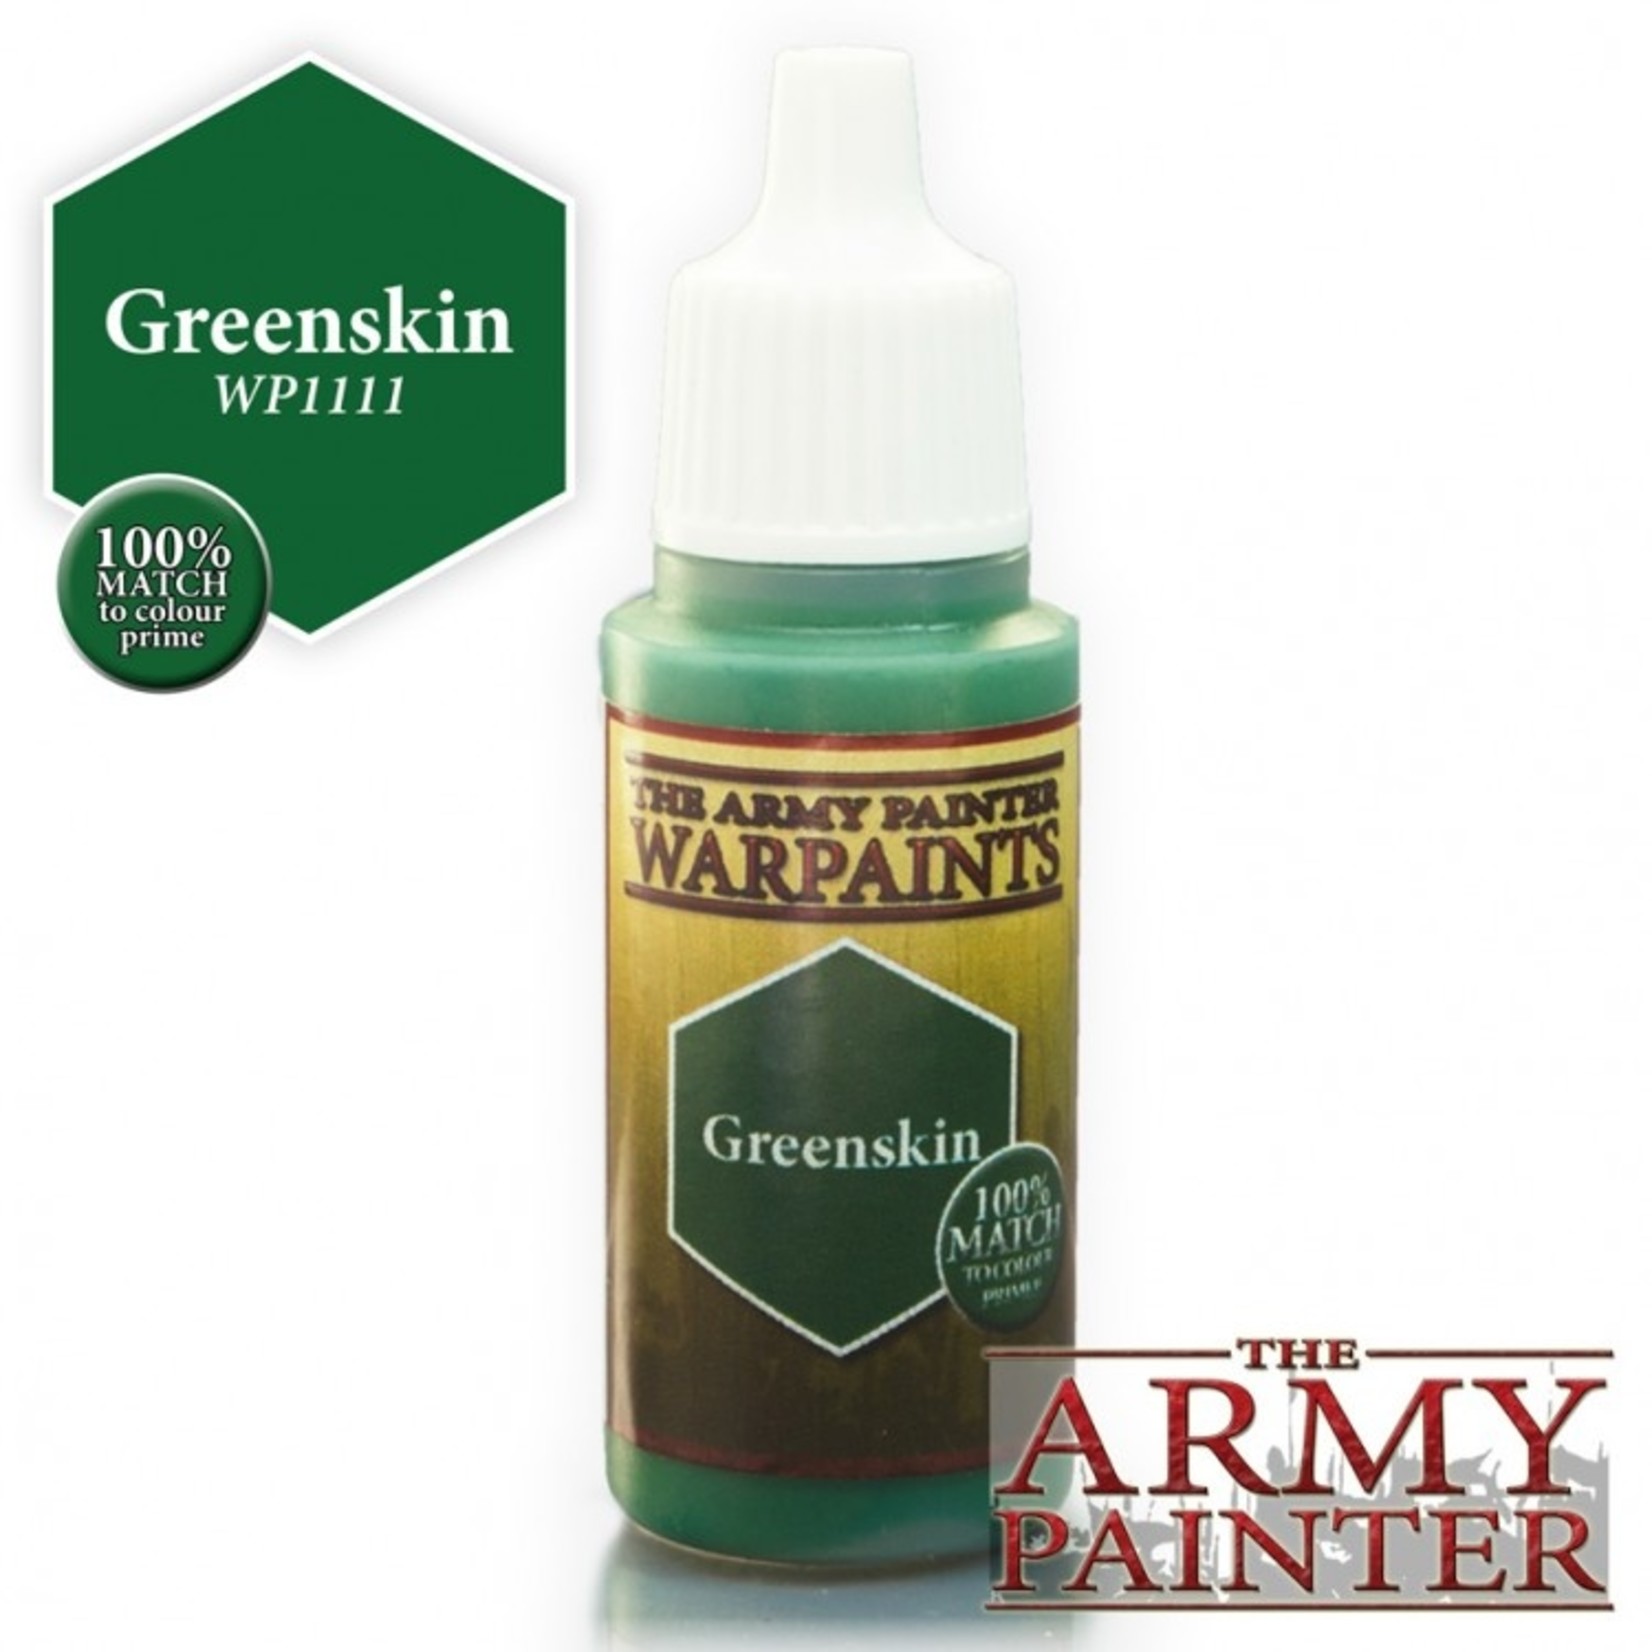 The Army Painter The Army Painter Greenskin 18ml